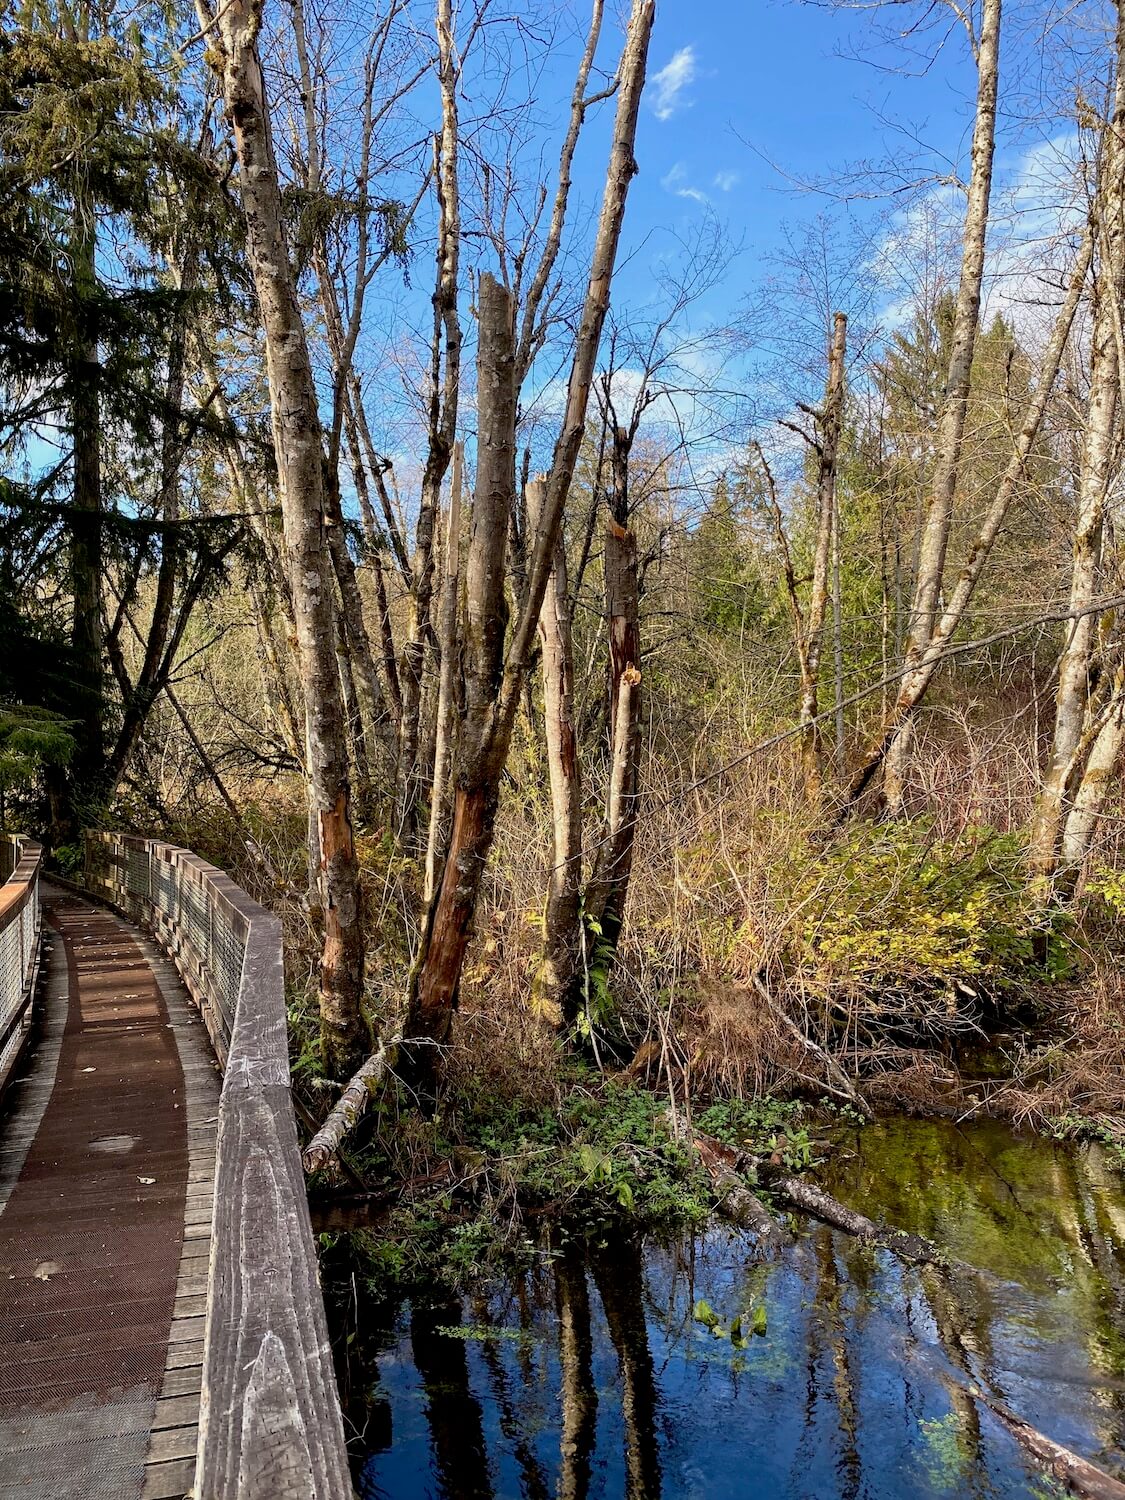 The boardwalk at West Hylebos Wetlands hugs the side of a watery marsh with clear water and leafless birch trees with blue sky in the background.